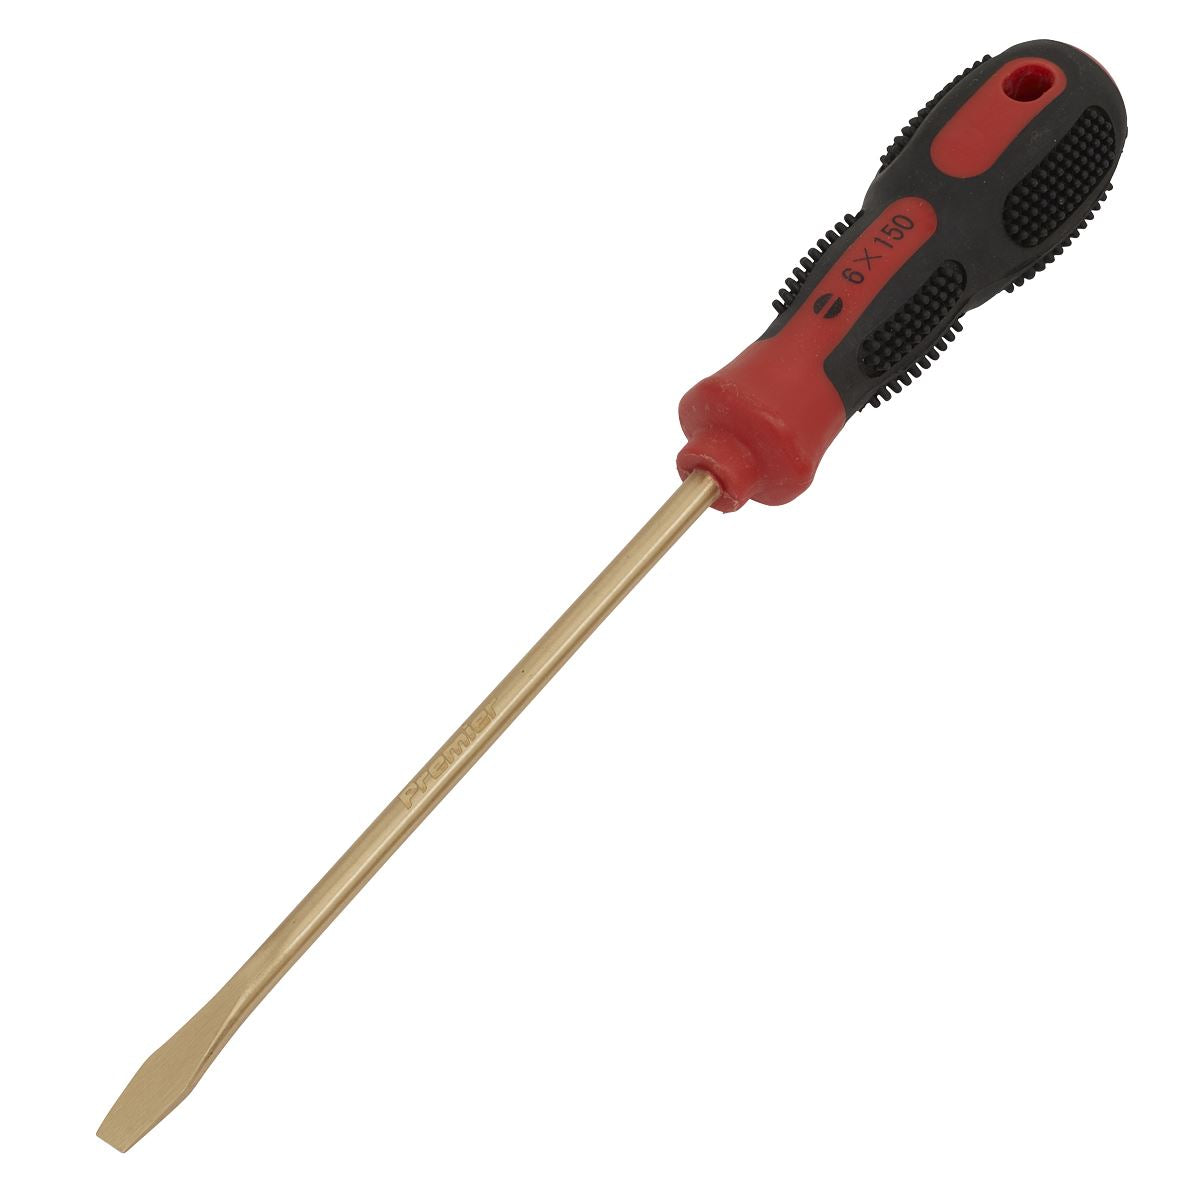 Sealey Premier Screwdriver Slotted 6 x 150mm - Non-Sparking